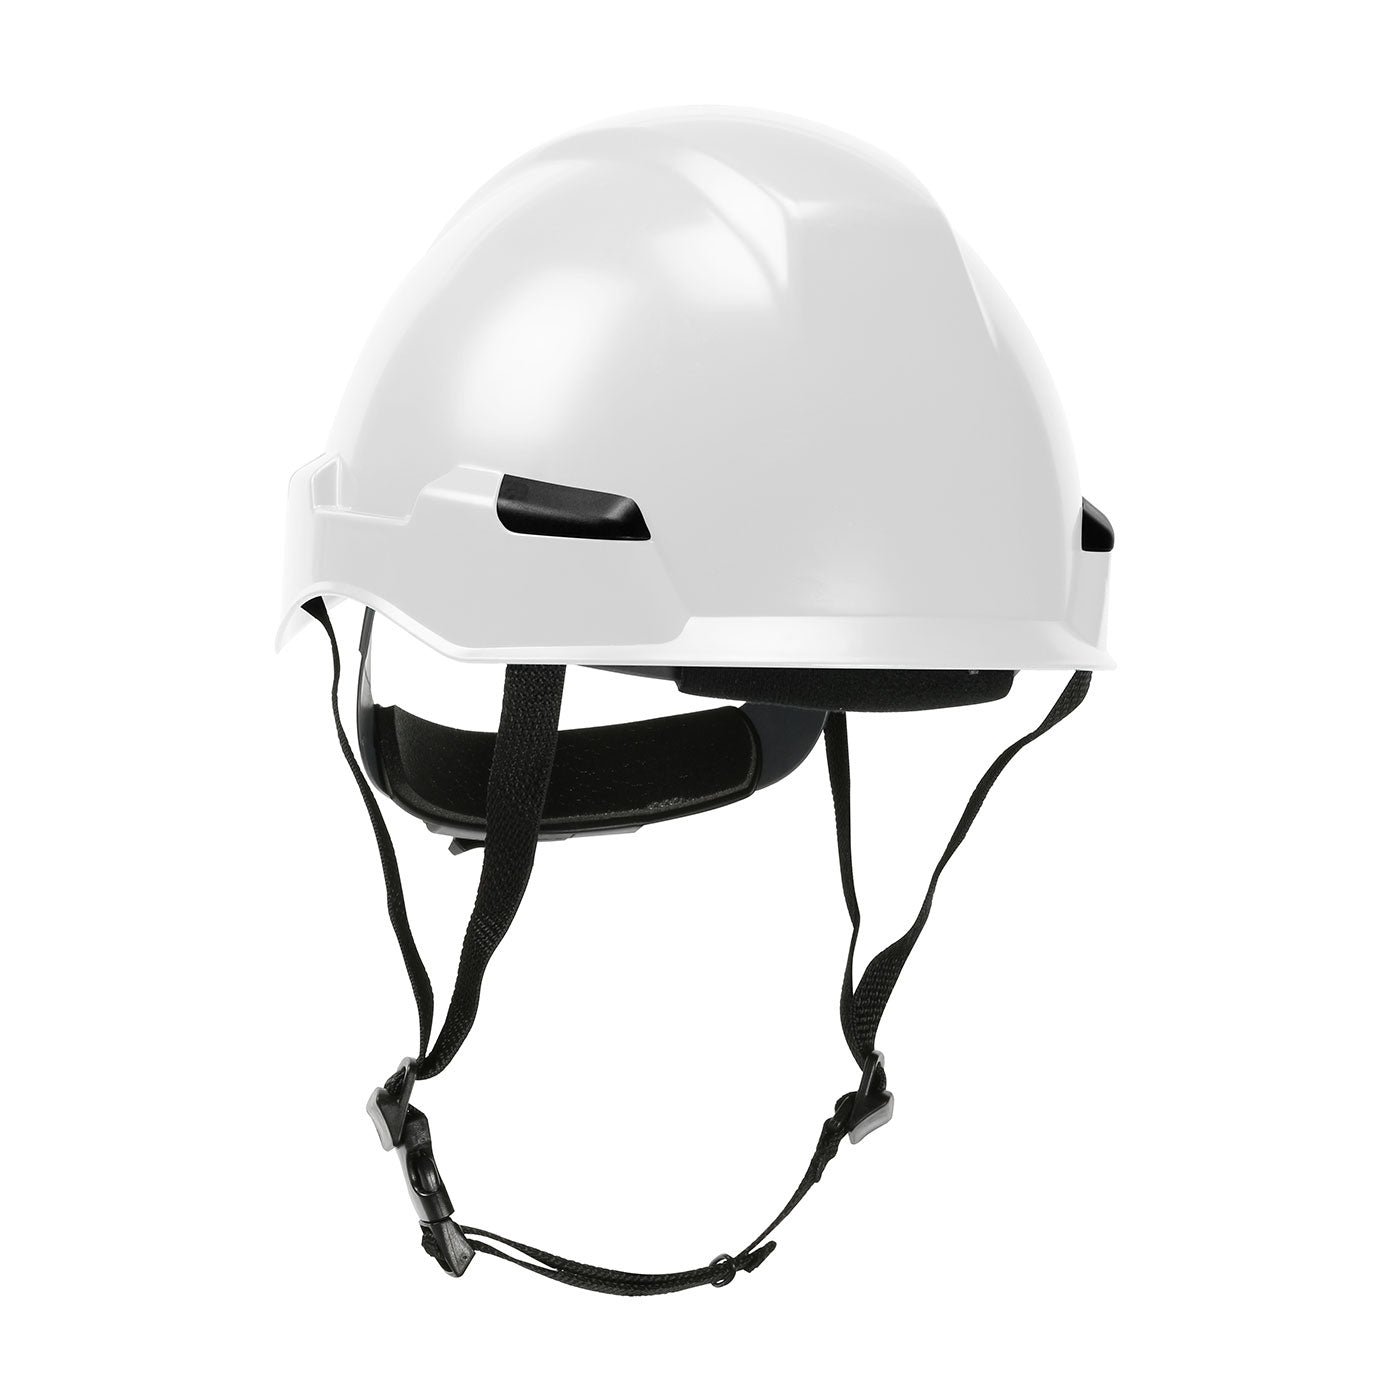 Rocky™ Industrial Climbing Helmet with Polycarbonate / ABS Shell, Hi-Density Foam Impact Liner, Nylon Suspension, Wheel Ratchet Adjustment and 4-Point Chin Strap